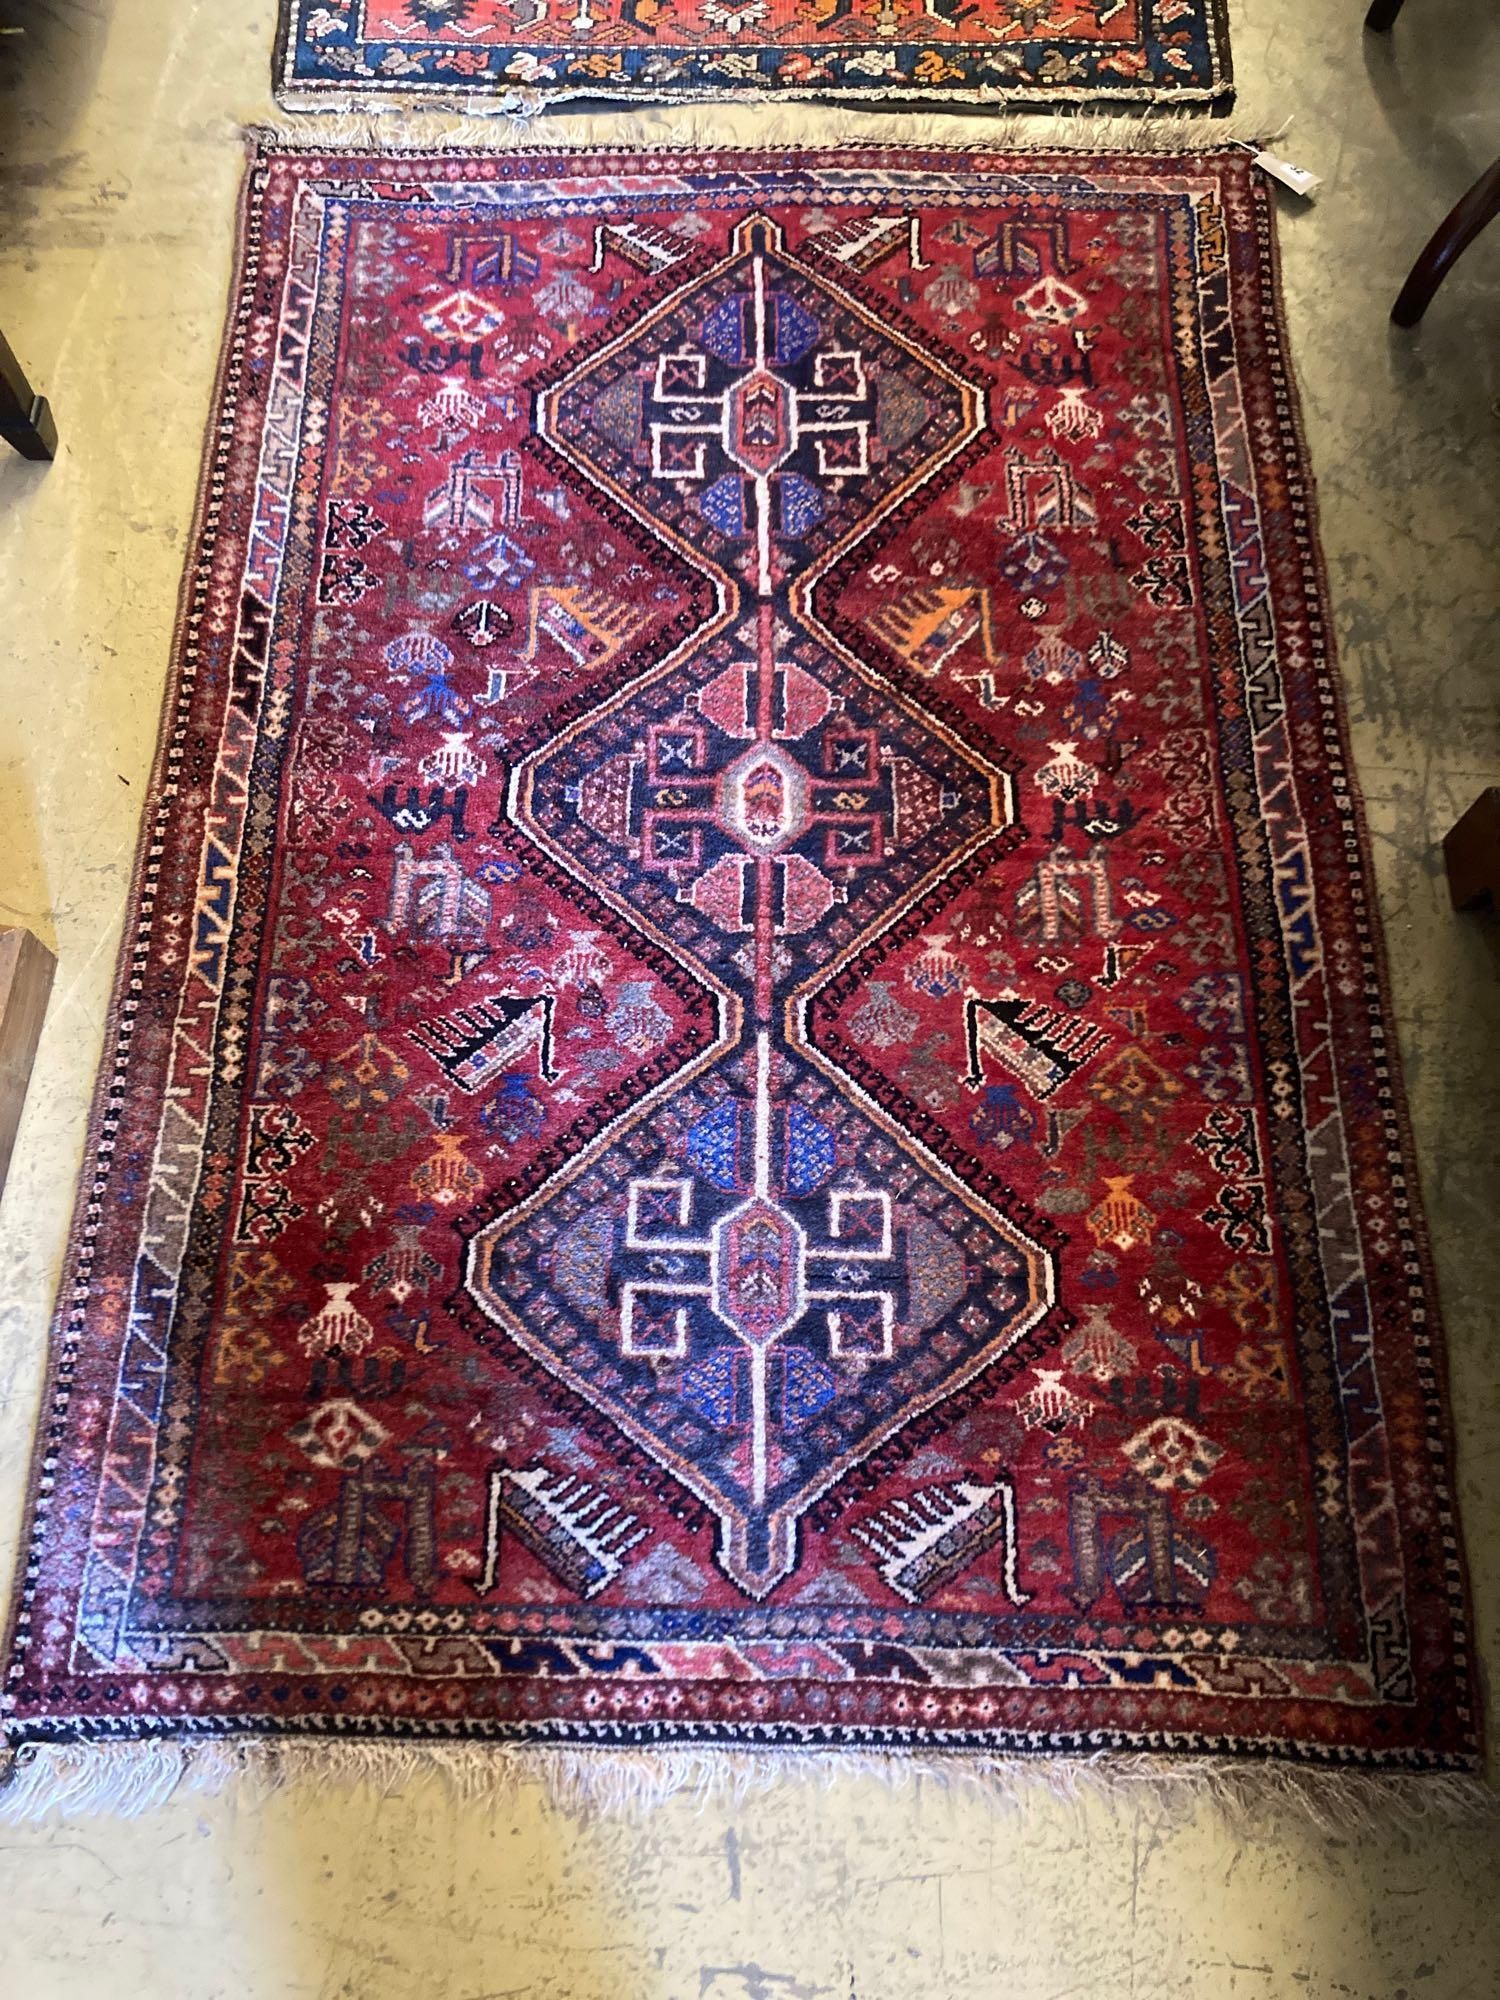 A Hamadan red ground rug, 157 x 109cmCONDITION: Good condition, some slight wear at the fringe